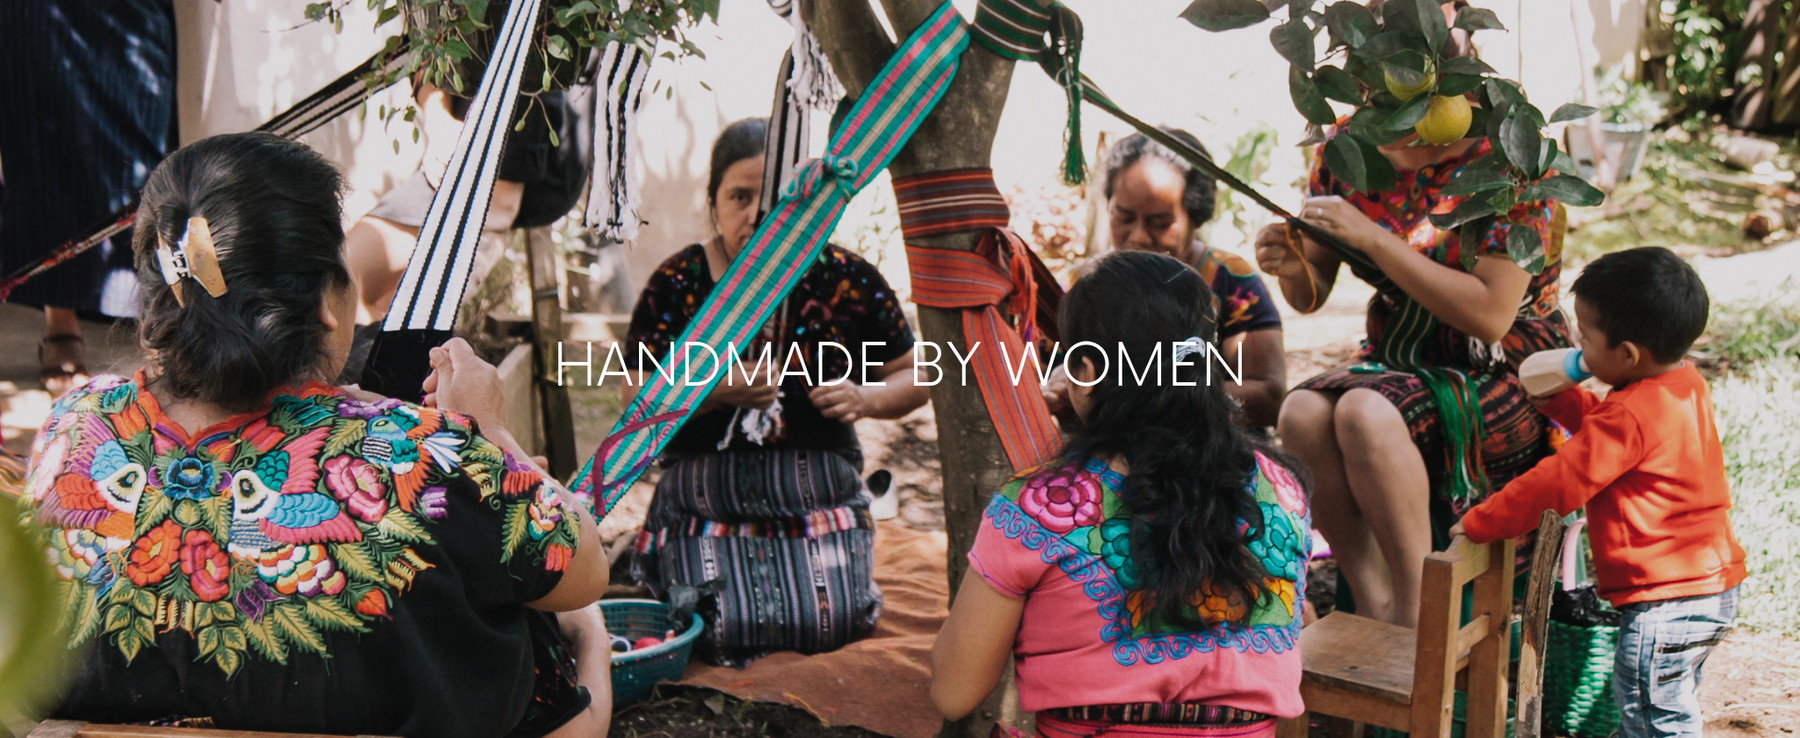 Fashion camera straps and bag straps hand-woven by indigenous women in rural Guatemala shop ethical Hiptipico